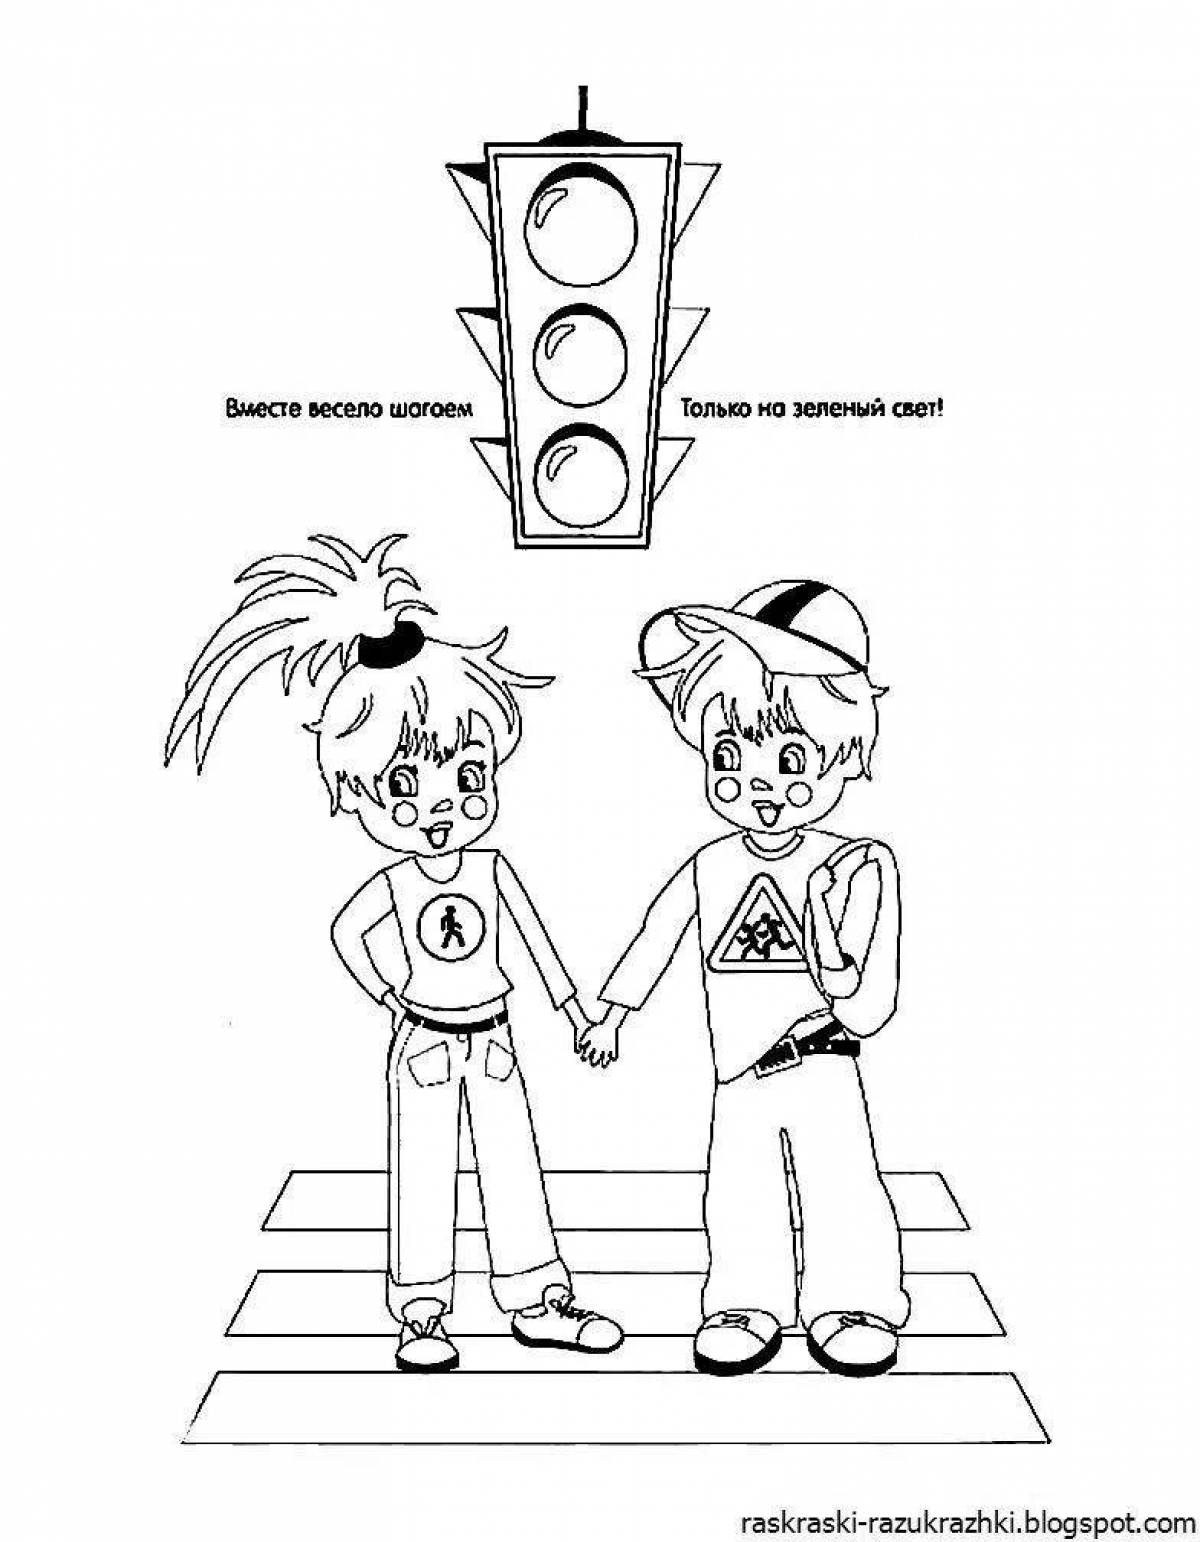 Colorful traffic light coloring page for 5-6 year olds